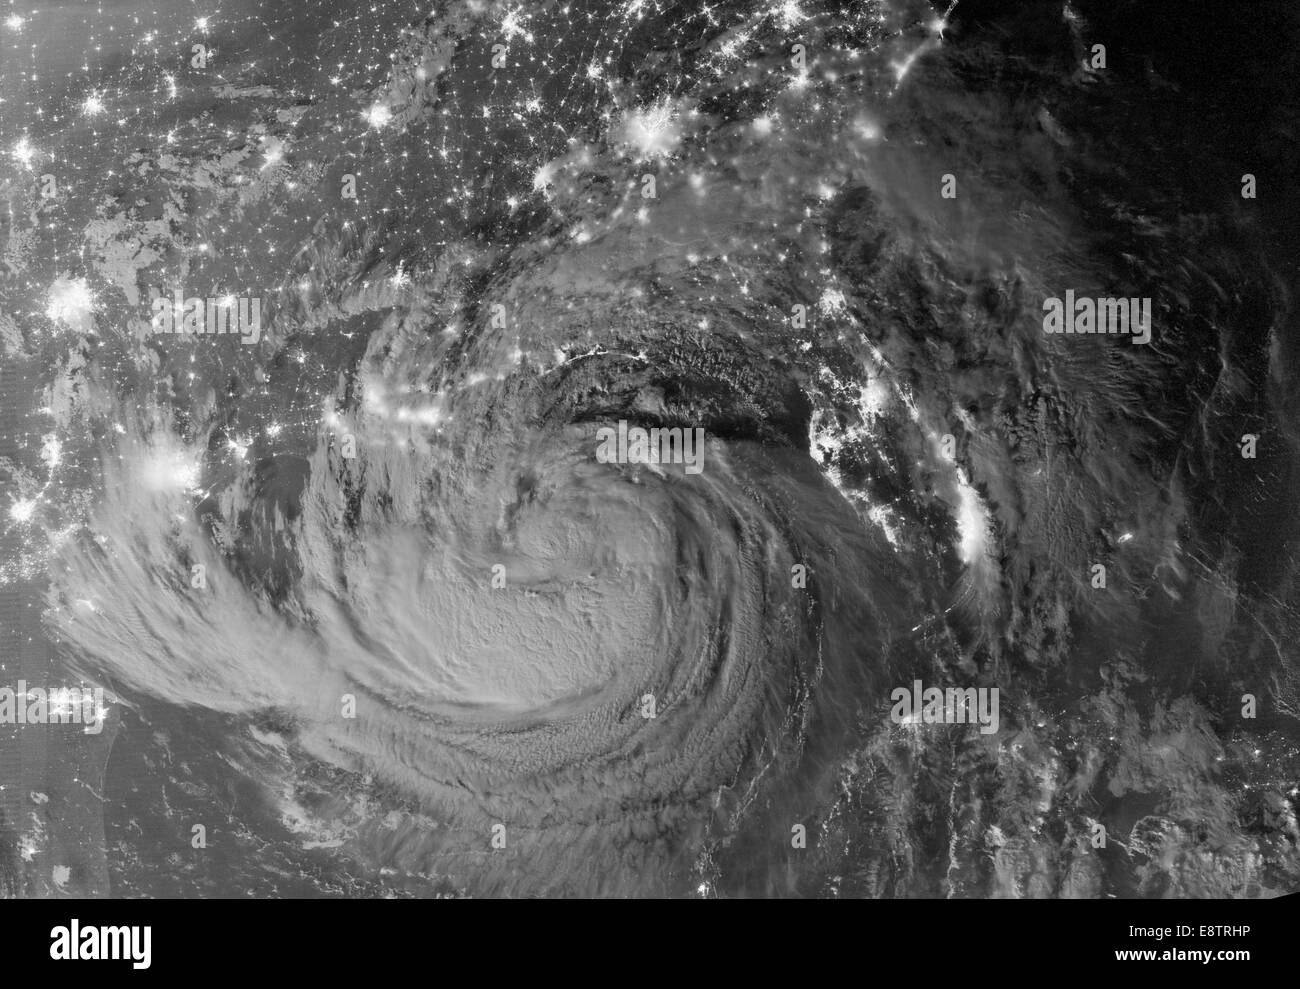 NASA image acquired August 28, 2012 Early on August 28, 2012, the Visible Infrared Imaging Radiometer Suite (VIIRS) on the Suomi-NPP satellite captured this nighttime view of Tropical Storm Isaac and the cities near the Gulf Coast of the United States. Th Stock Photo